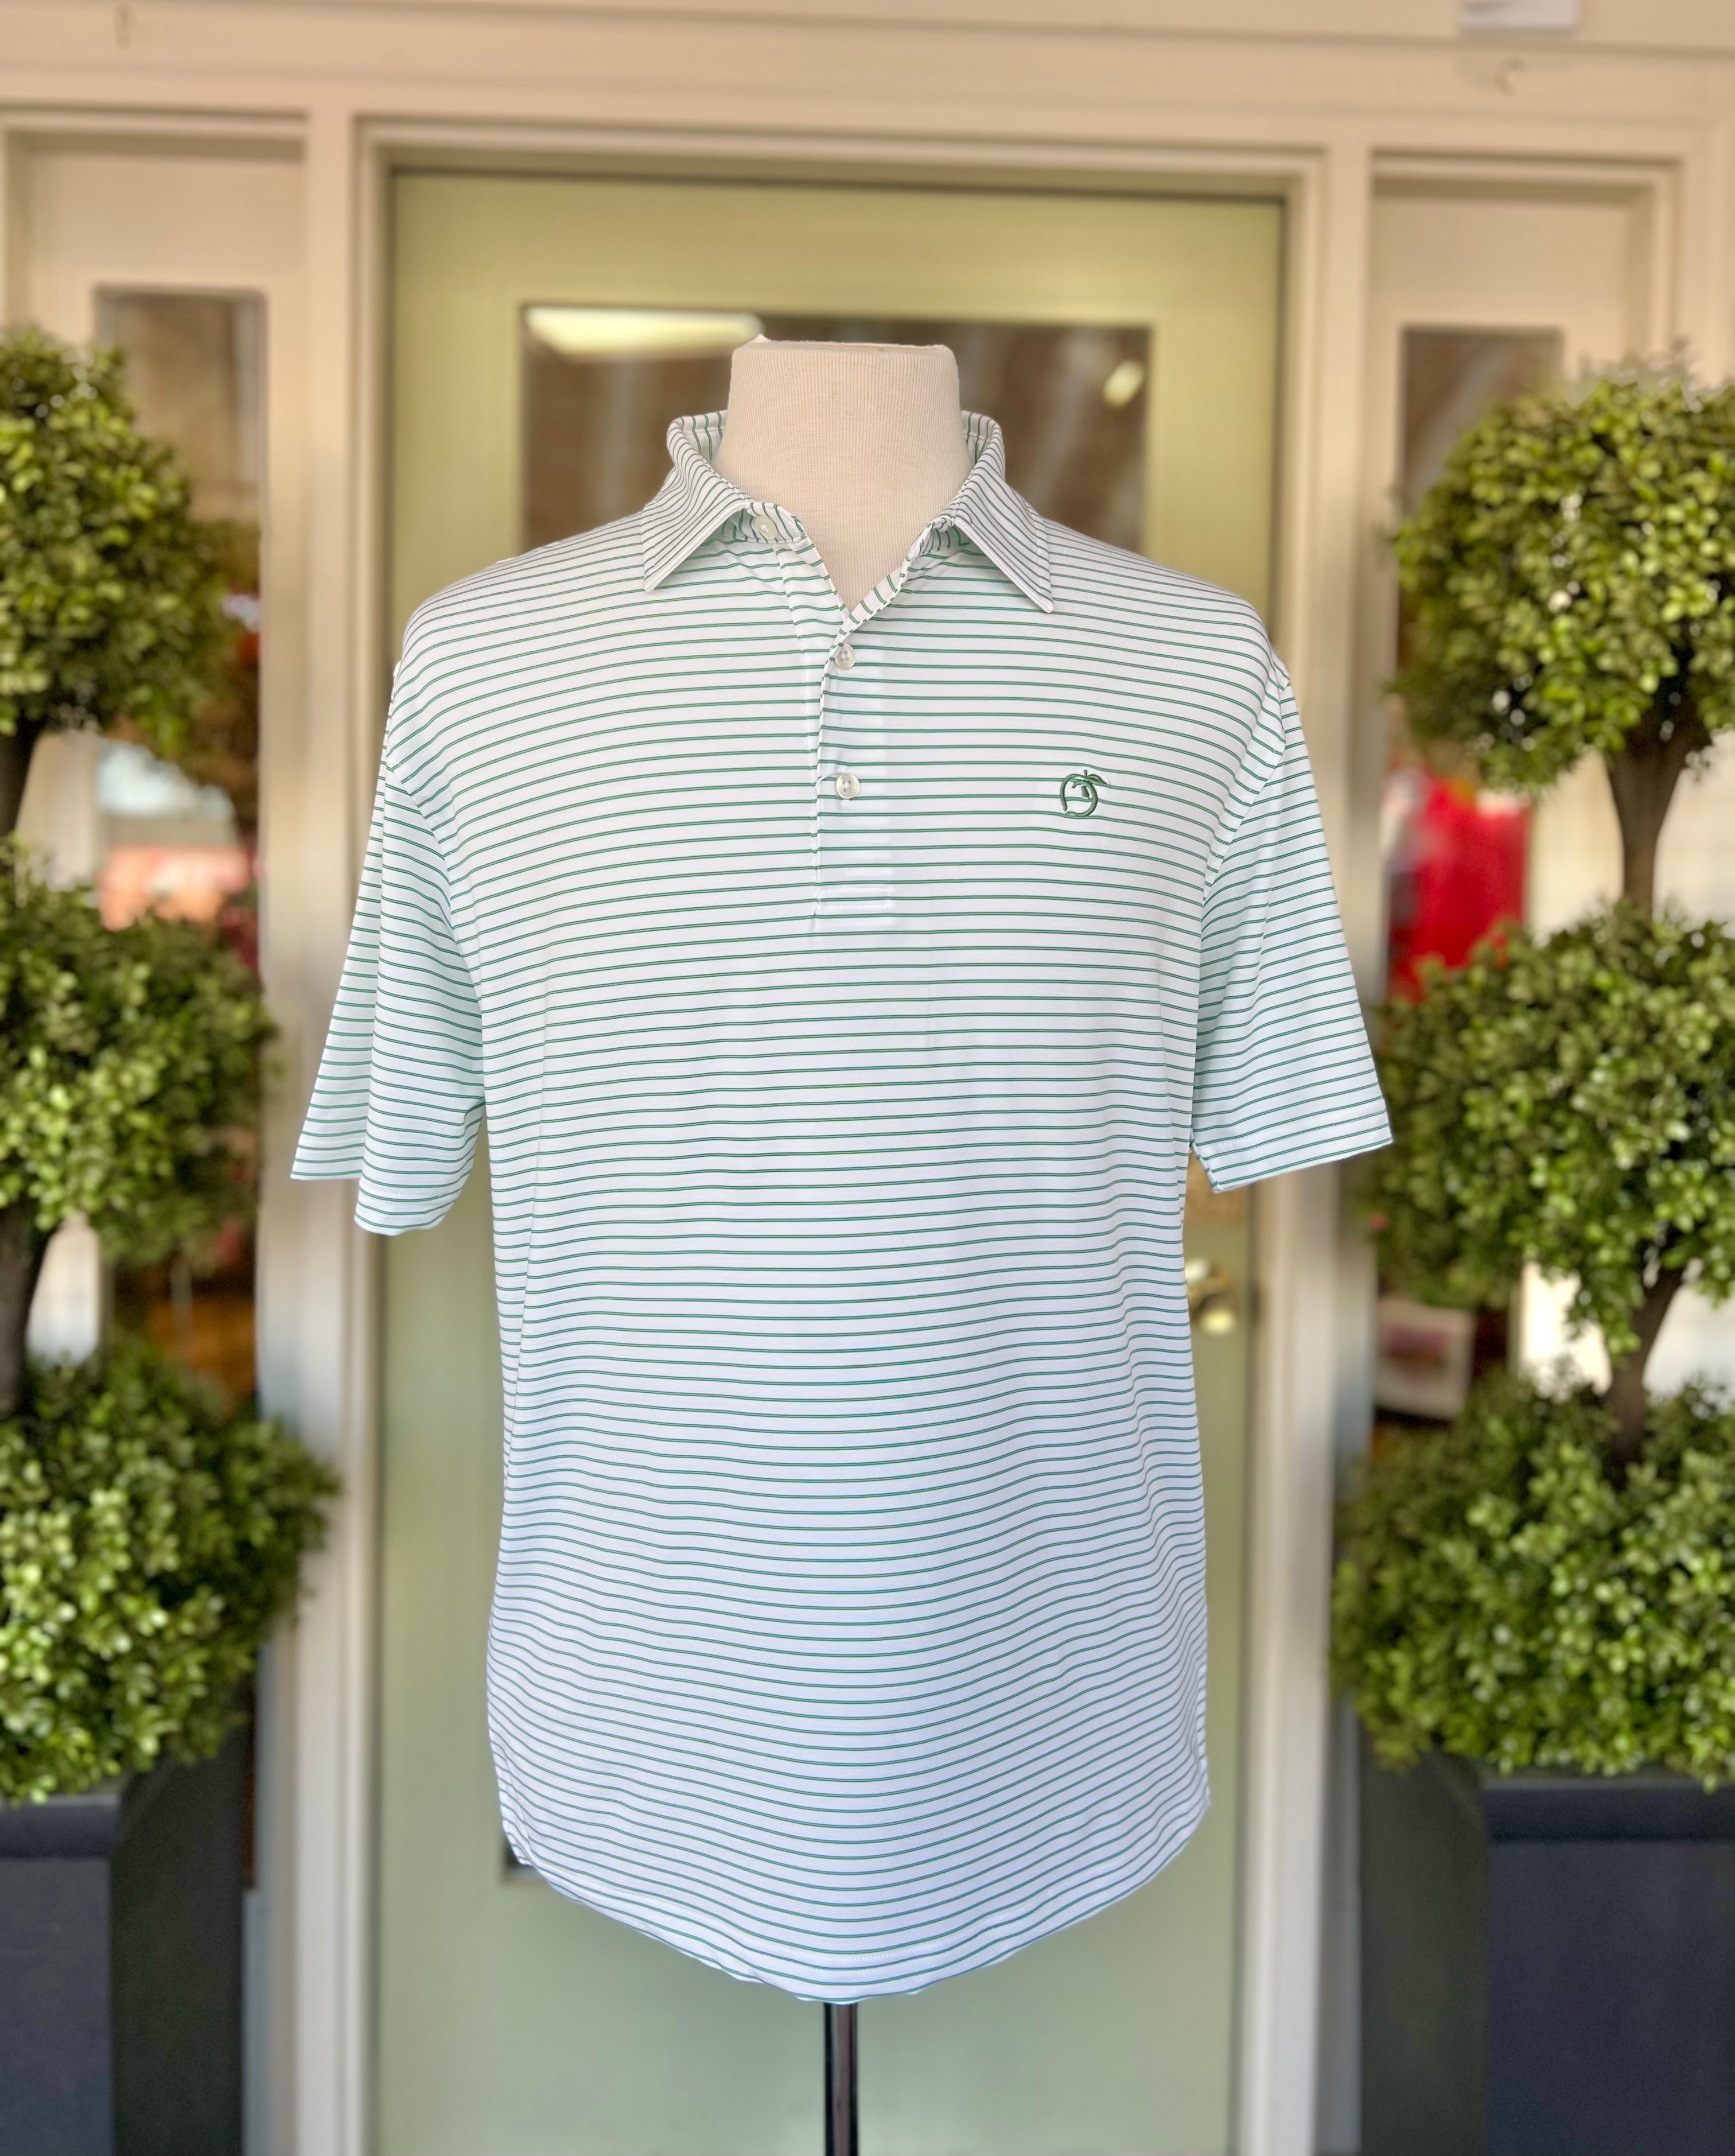 Heathered Laurel Performance Polo in Pine Green & White by Peach State Pride